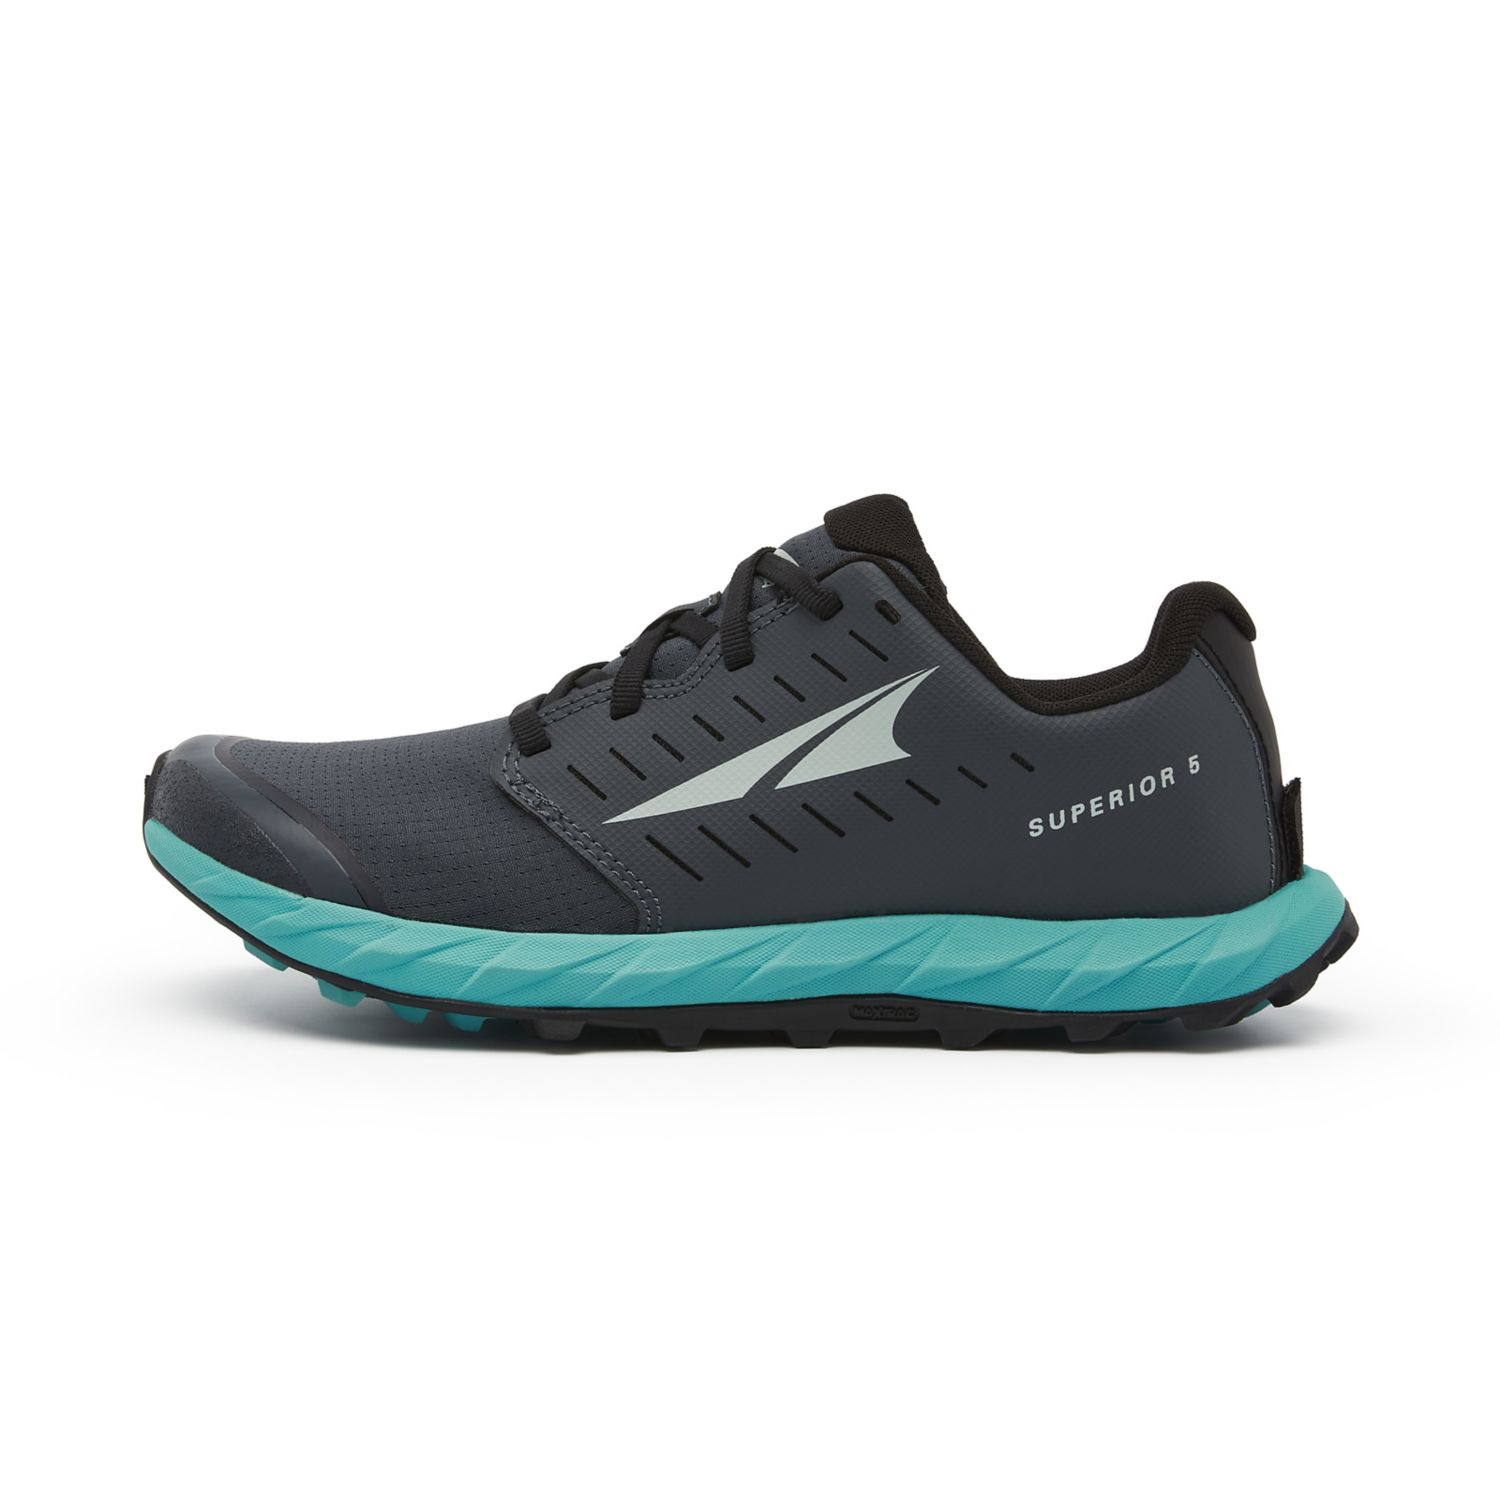 Altra Superior 5 Women's Trail Running Shoes Black | South Africa-60934289